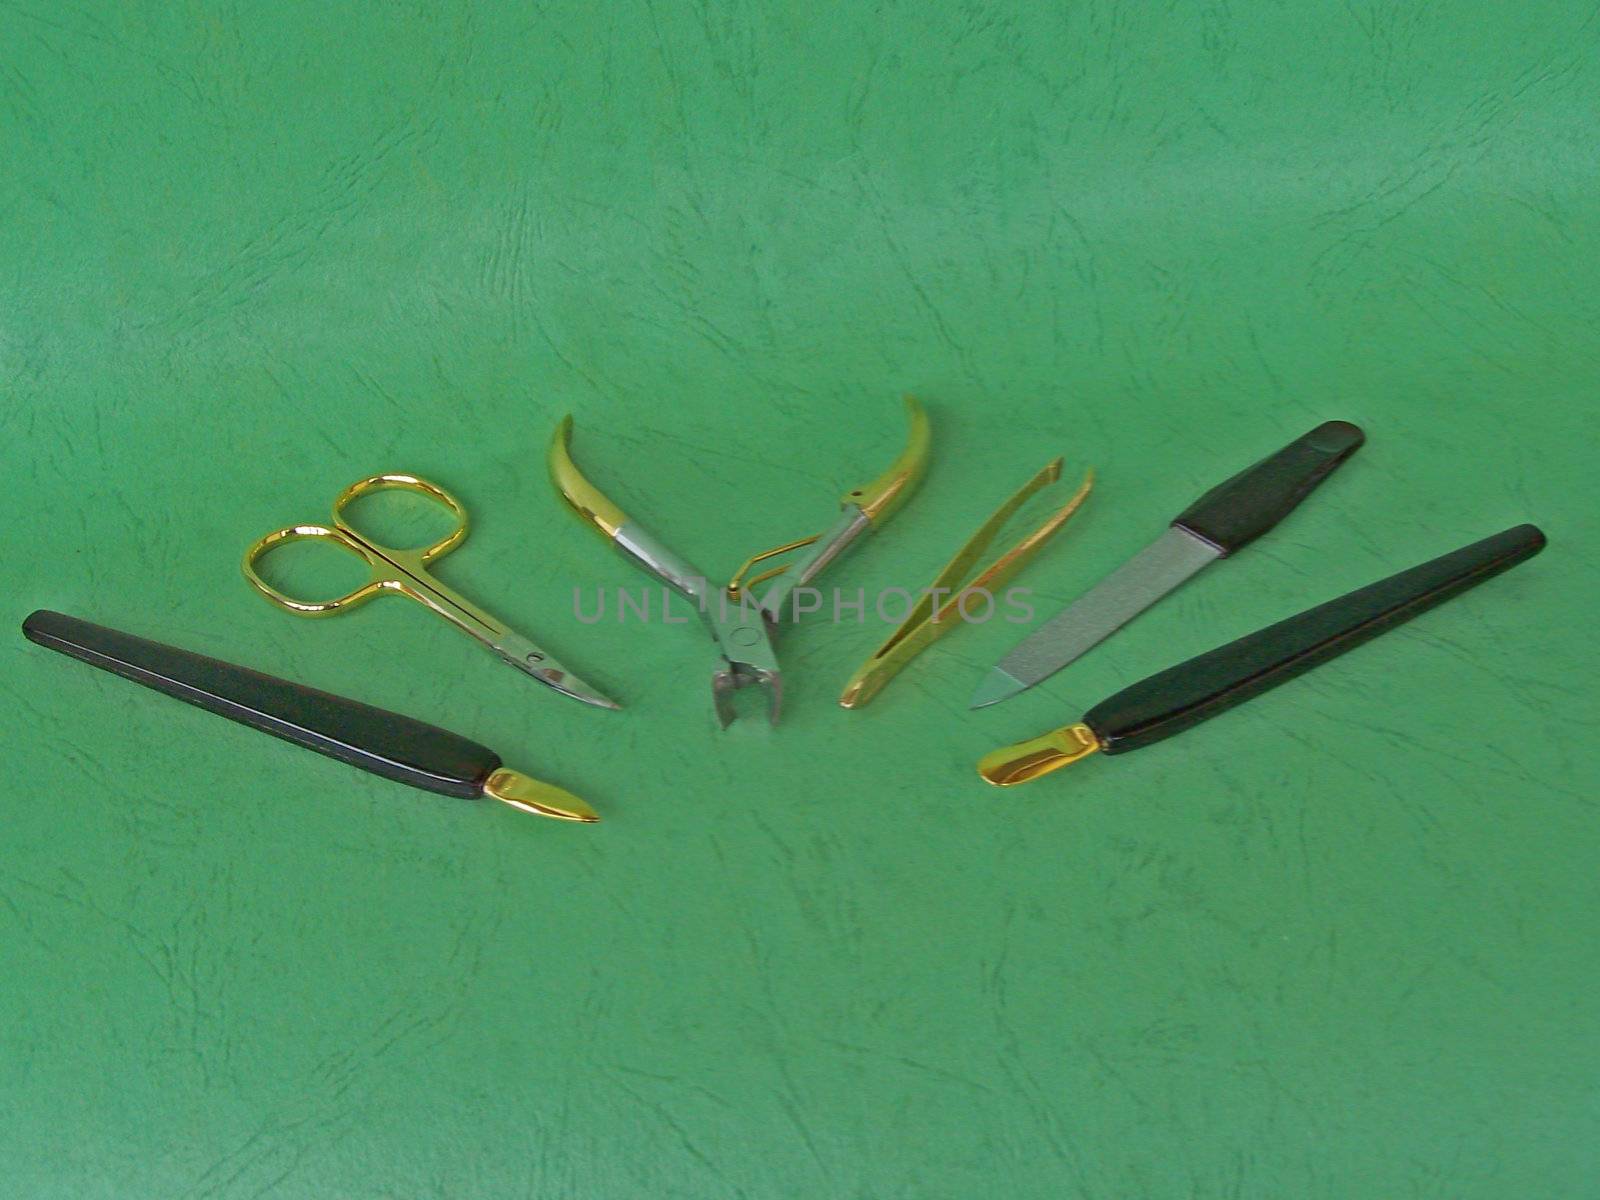 Several tools for hygiene. Close up. Green background.